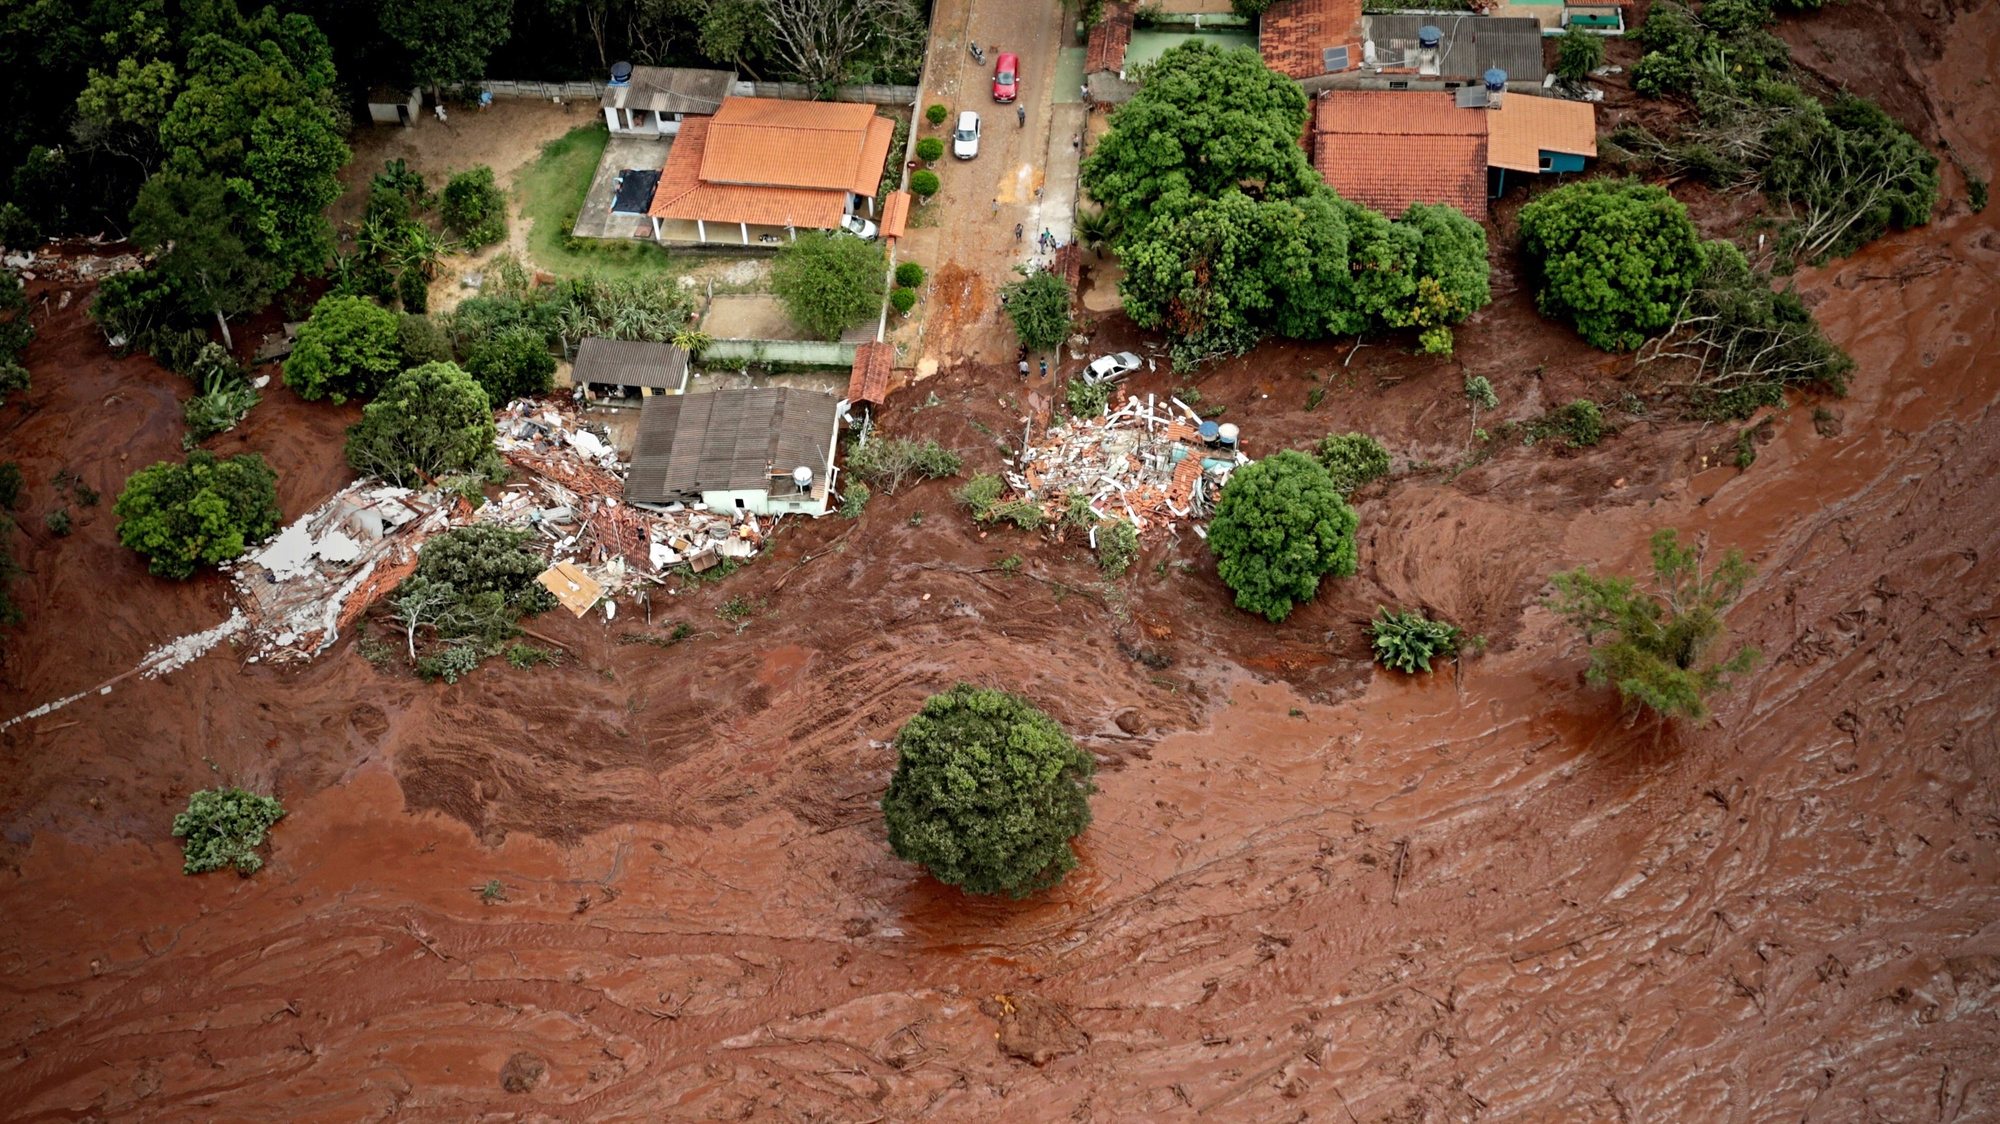 epa08986842 (FILE) An a erial view o  mud and waste from the disaster caused by dam spill in Brumadinho, Minas Gerais, Brazil, 26 January 2019 (reissued 04 February 2021). Brazilian mining giant Vale SA reached a settlement agreement with the Brazilian state for the deadly Brumadinho dam disaster in January 2019, which killed 270 people. The iron ore producer will pay 7.03 billion USD, Vale said 04 February 2021.  EPA/Antonio Lacerda